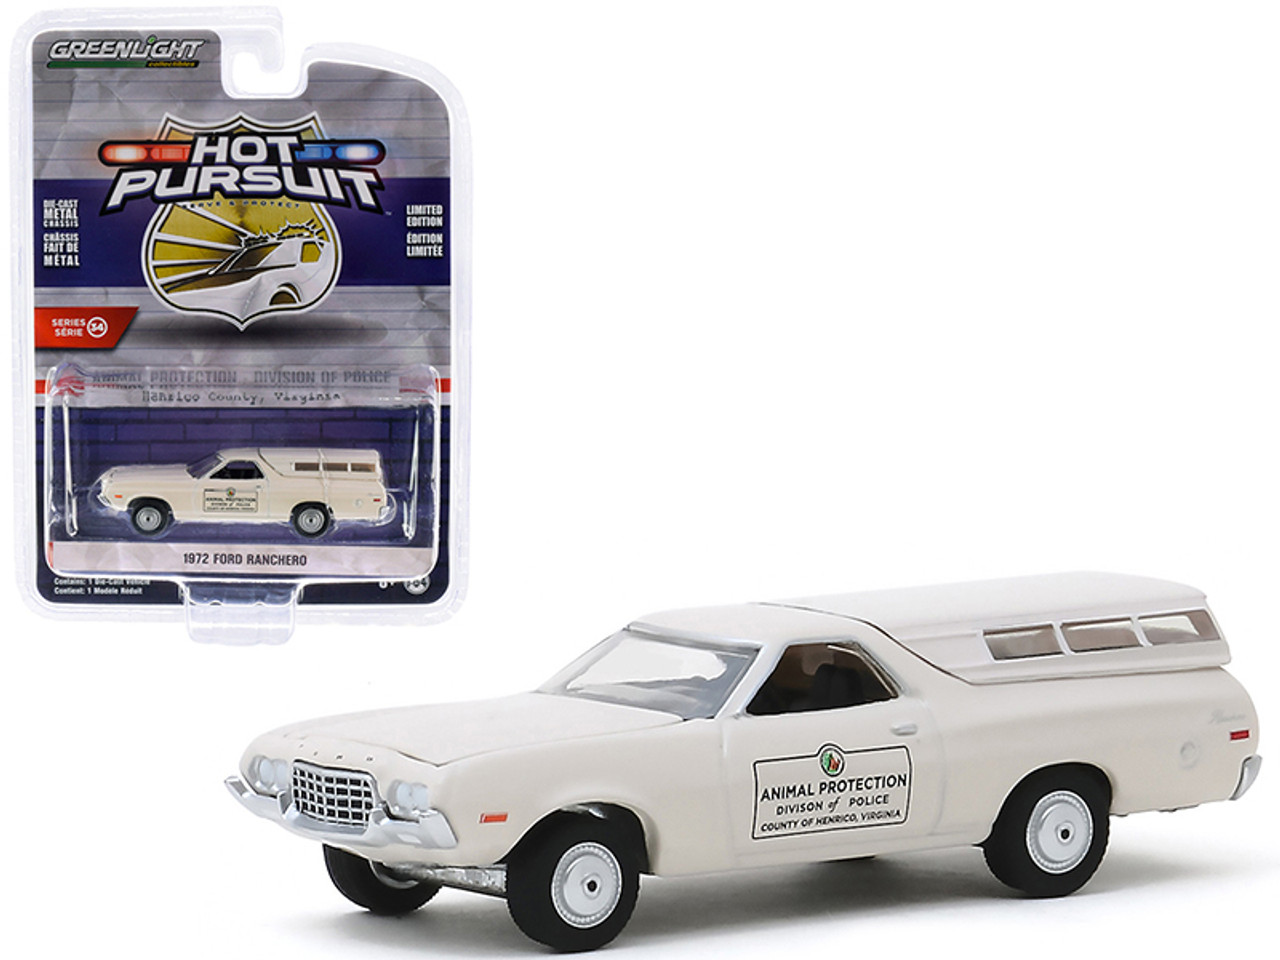 1972 Ford Ranchero with Canopy Cream "Animal Protection Division of Police" (Henrico County, Virginia) "Hot Pursuit" Series 34 1/64 Diecast Model Car by Greenlight